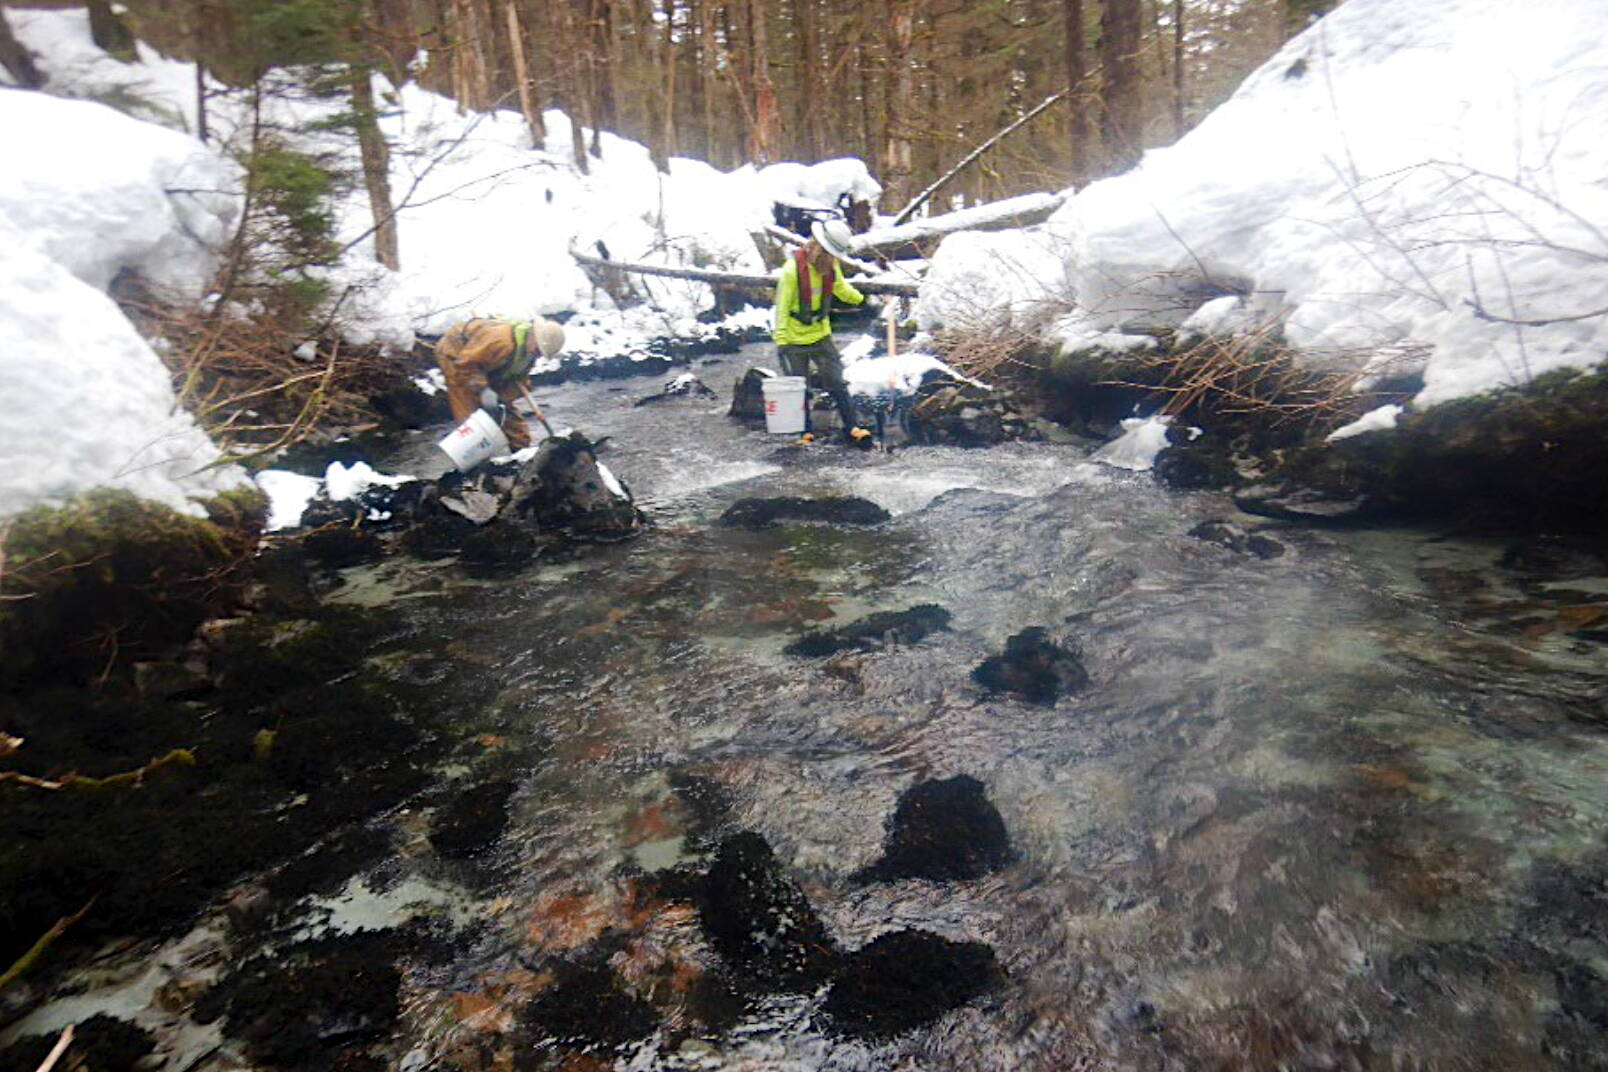 Employees at the Kensington Mine removing tailings from Johnson Creek on Feb. 17 following a Jan. 31 spill of about 105,000 gallons of slurry from the mine, although a report by the mine’s owners states about half slurry reached the creek 430 meters away. (Photo from report by Coeur Alaska)